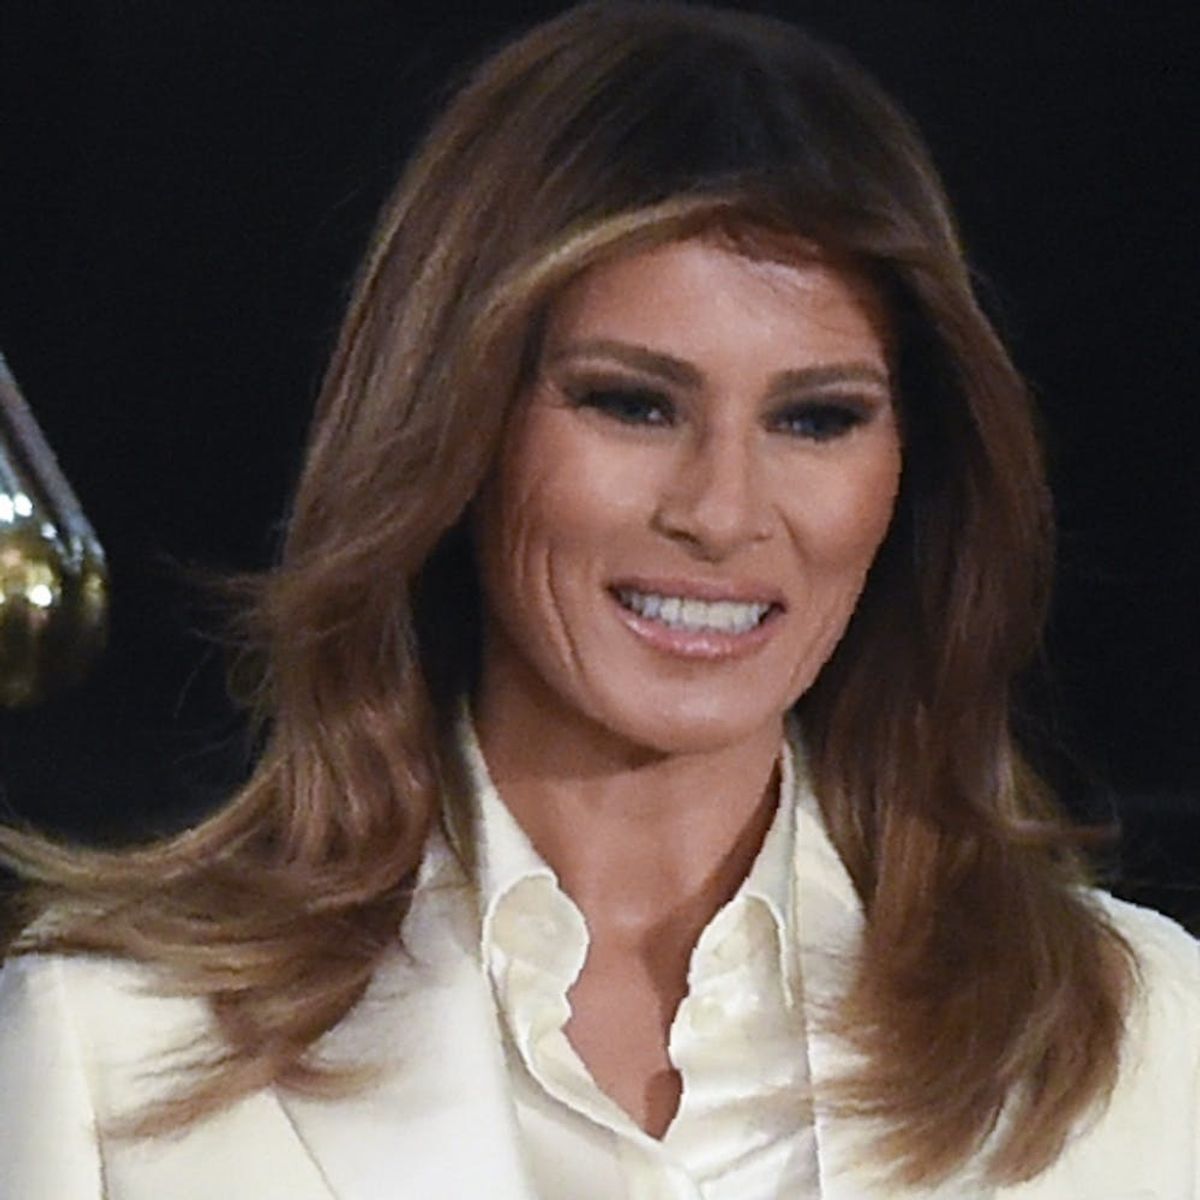 Melania Trump’s Cream Pantsuit Stole the Show at the State of the Union Address